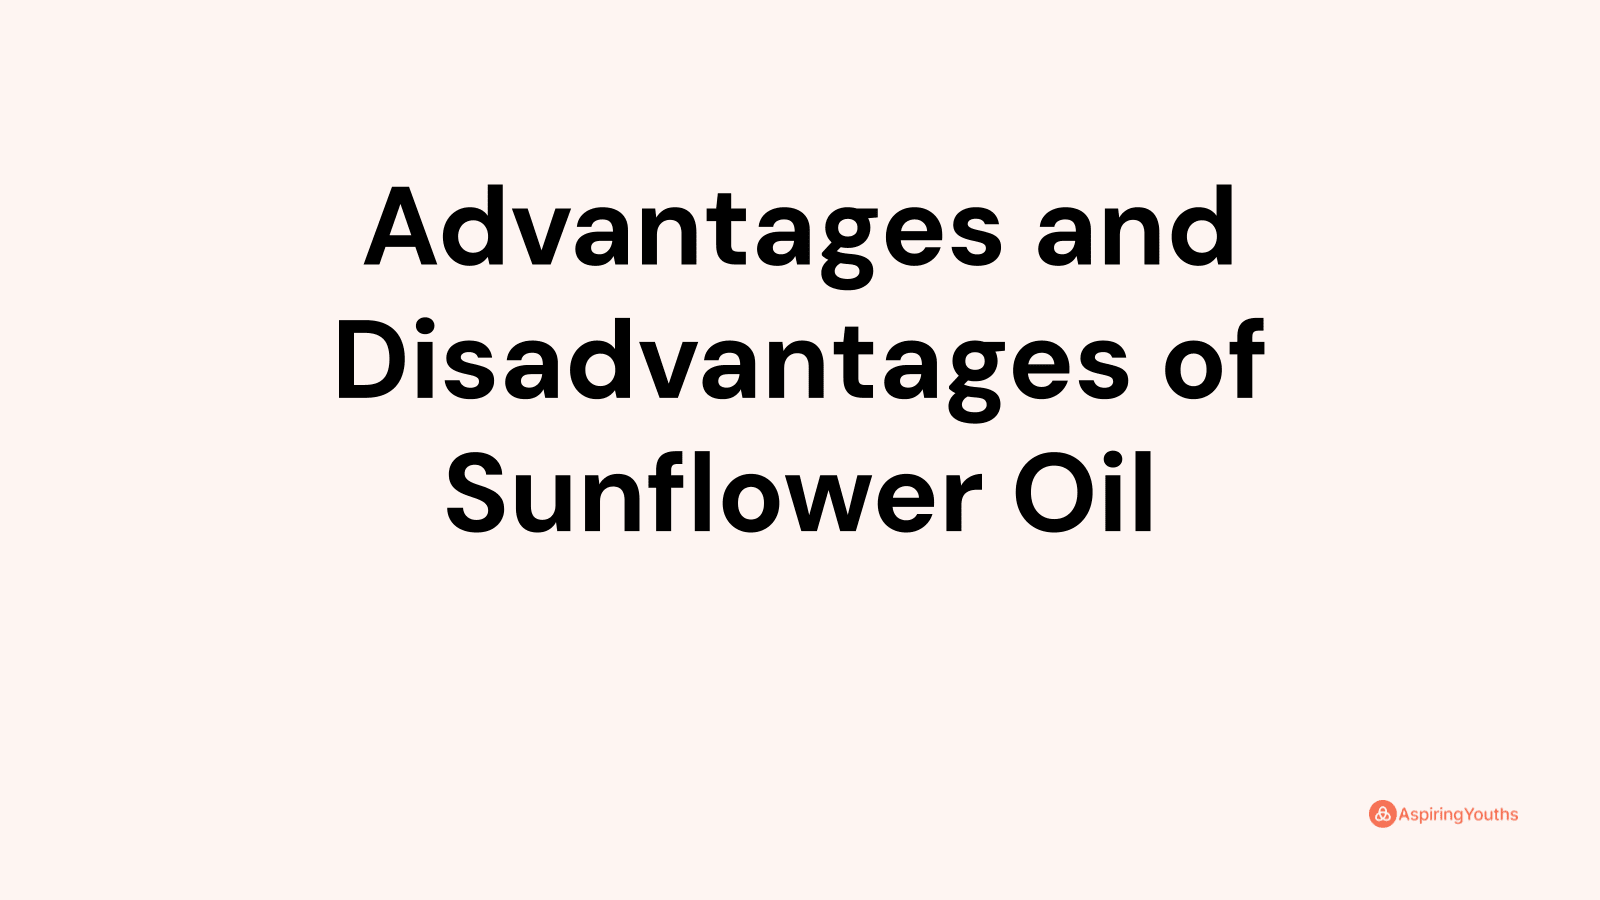 Advantages and disadvantages of Sunflower Oil